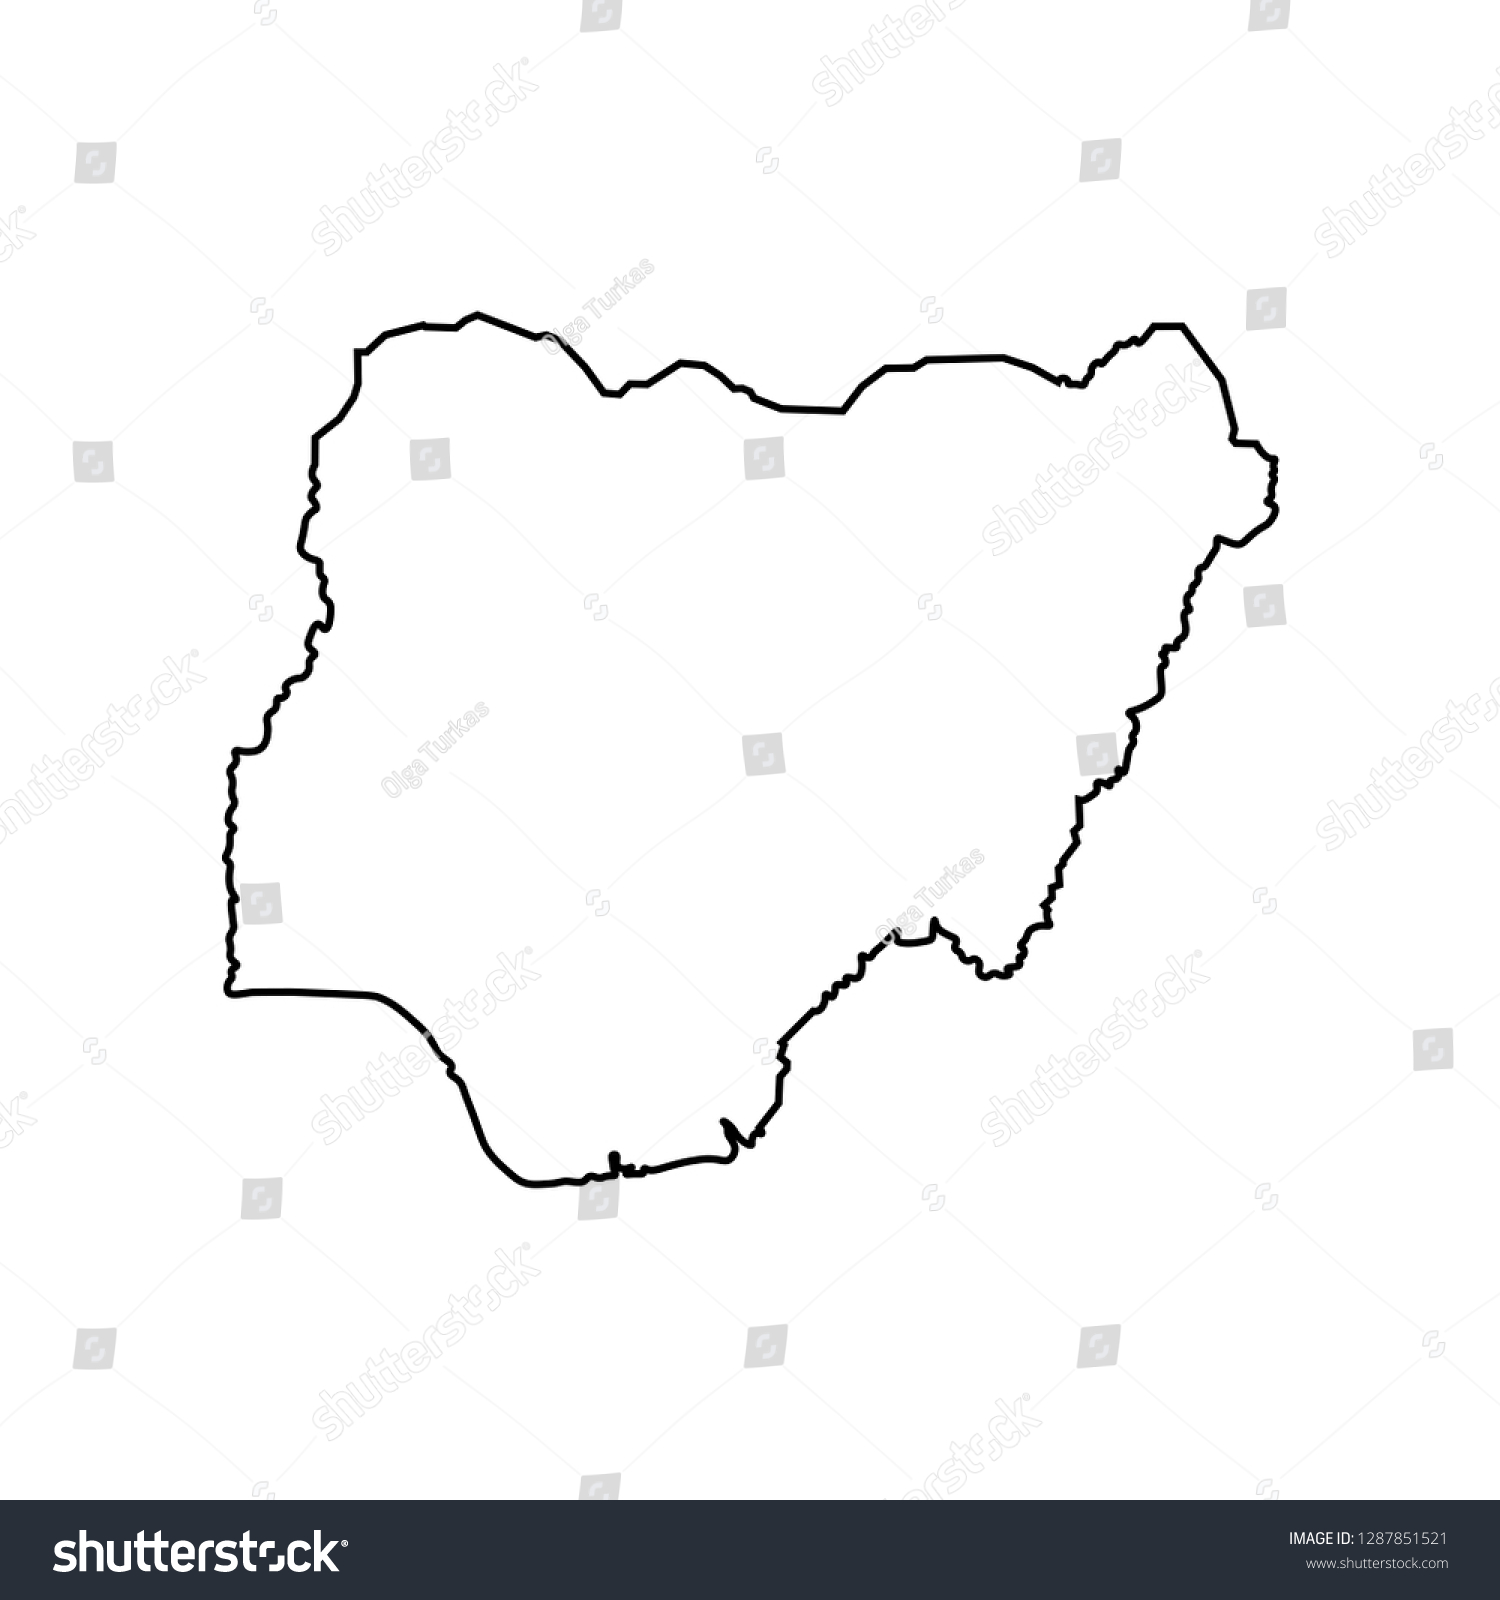 Vector Isolated Illustration Political Map African Stock Vector Royalty Free 1287851521 2386